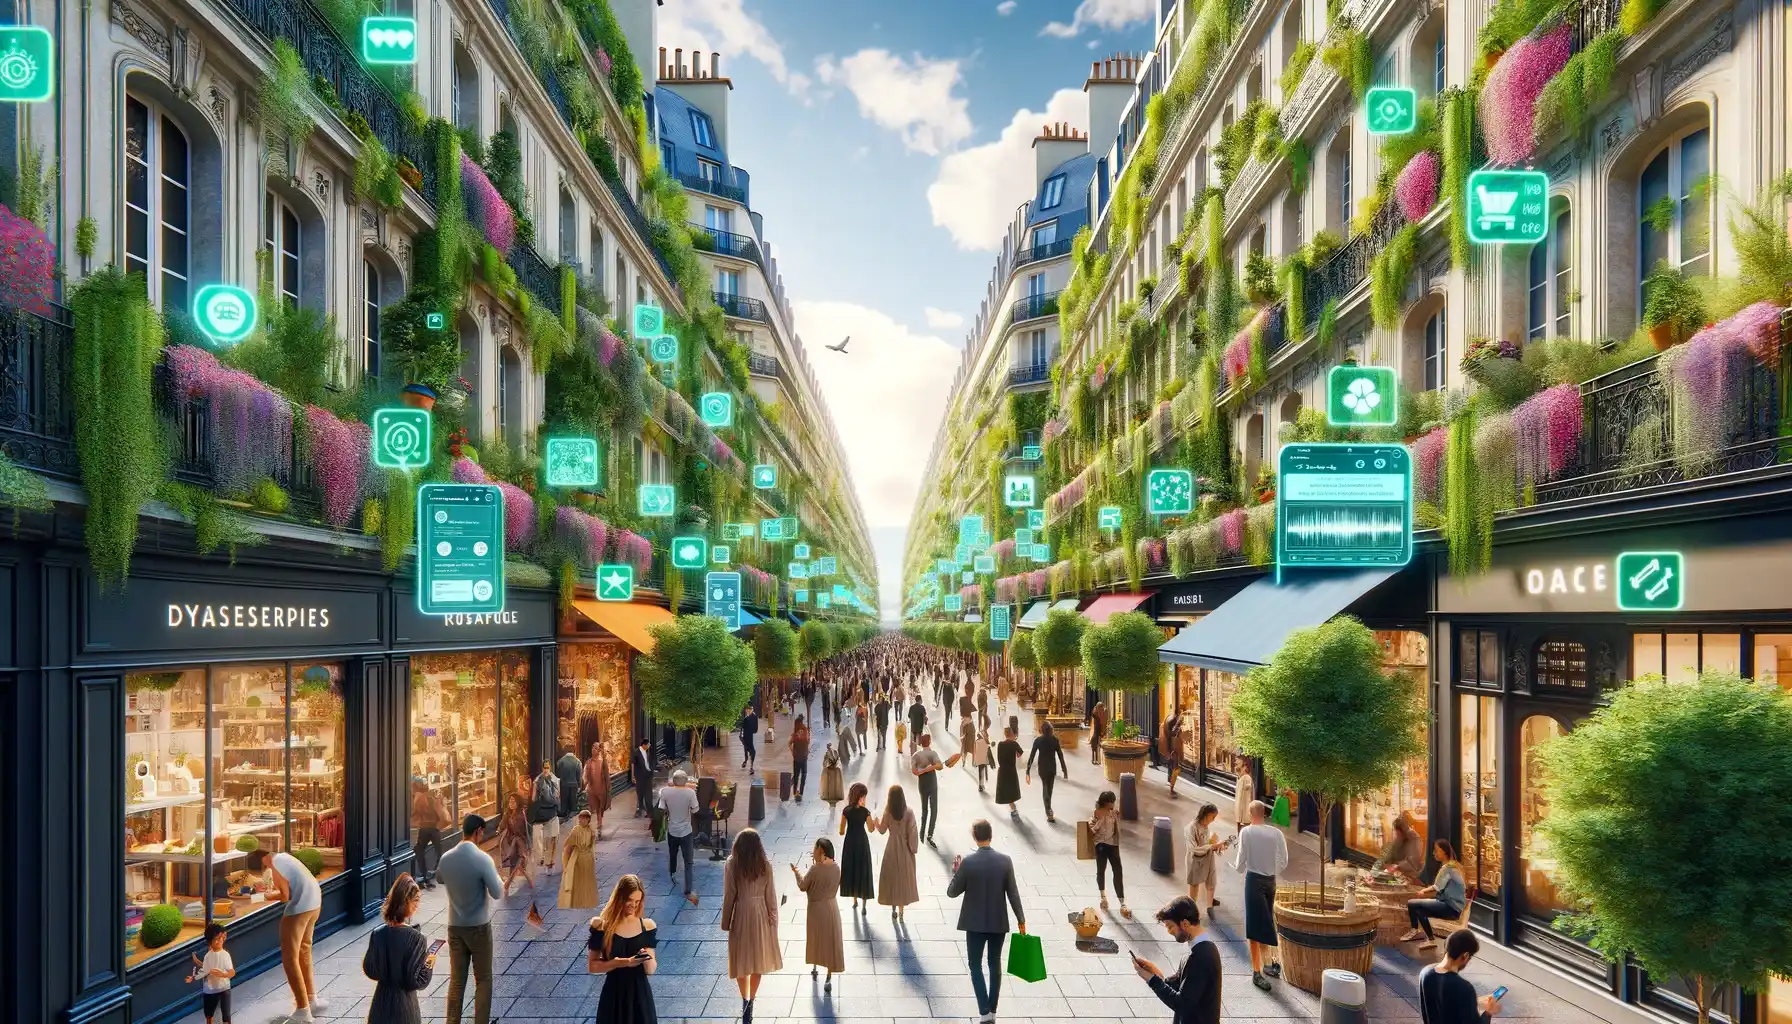 A highly detailed horizontal image of a bustling, eco-friendly shopping street in Paris. The street is teeming with people and is lined with lush greenery, including trees and vertical gardens, and numerous solar panels for sustainable energy. The architecture combines classic Parisian designs with modern, eco-conscious features. Shoppers are actively using their smartphones, and vivid augmented reality (AR) elements from various online shopping platforms are prominently displayed, floating above their heads or seamlessly integrated next to the storefronts. These AR elements include colorful digital price tags, interactive product information, and personalized eco-friendly product suggestions. The overall atmosphere is lively and technologically advanced, highlighting a blend of tradition and futuristic shopping experience.